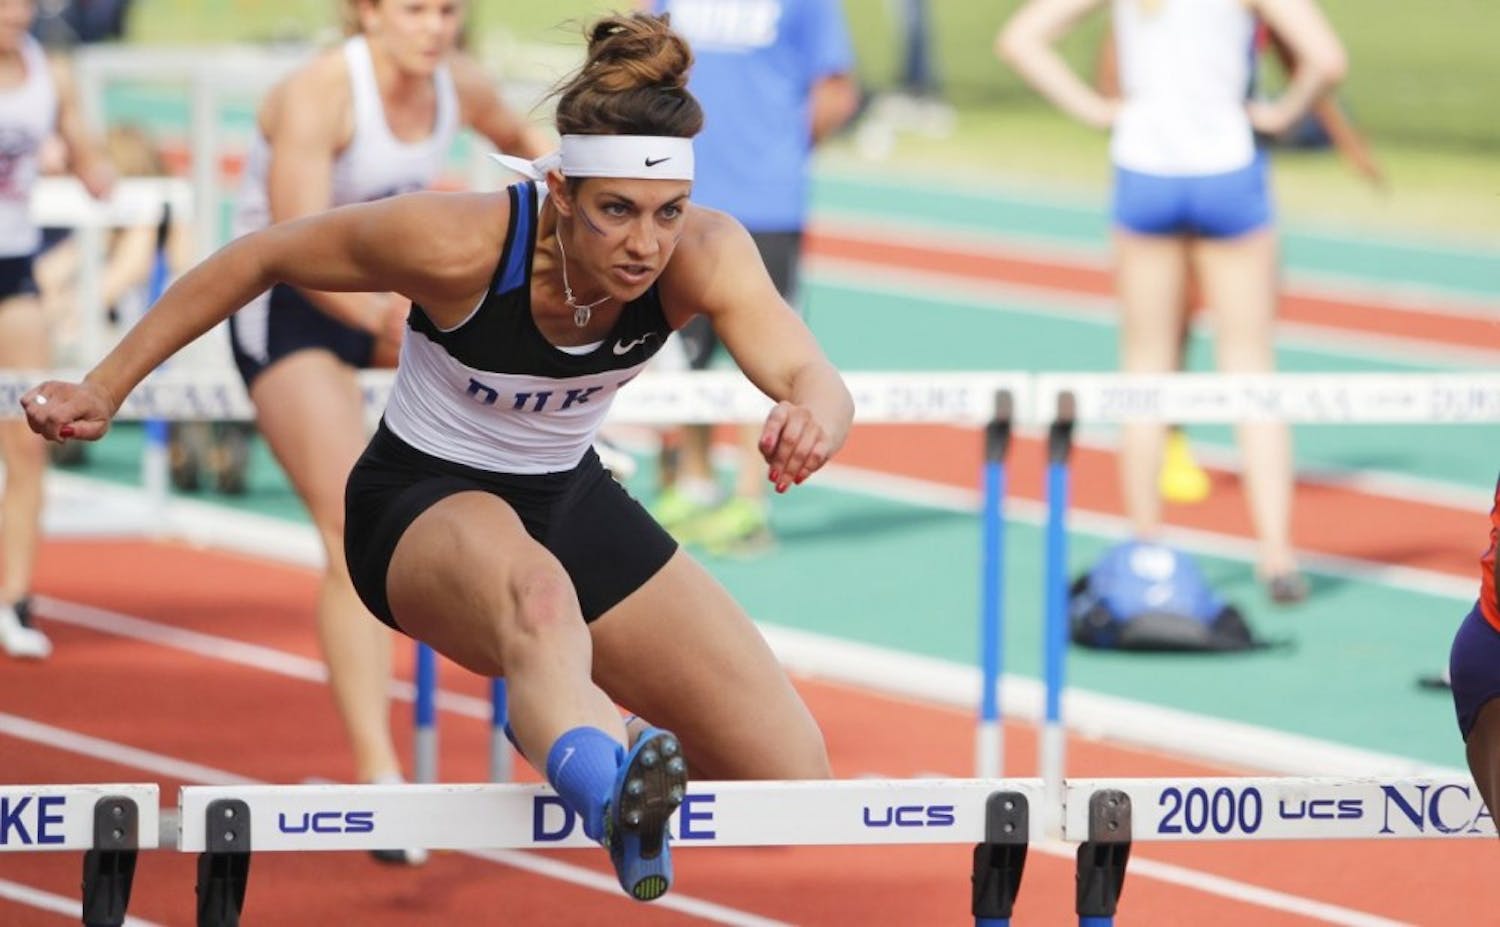 Teddi Maslowski barely missed out on the finals of the&nbsp;100-meter hurdles but helped Duke's 4-x-200 meter relay team finish fifth overall and record the third-fastest time in program history at&nbsp;1:35.64.